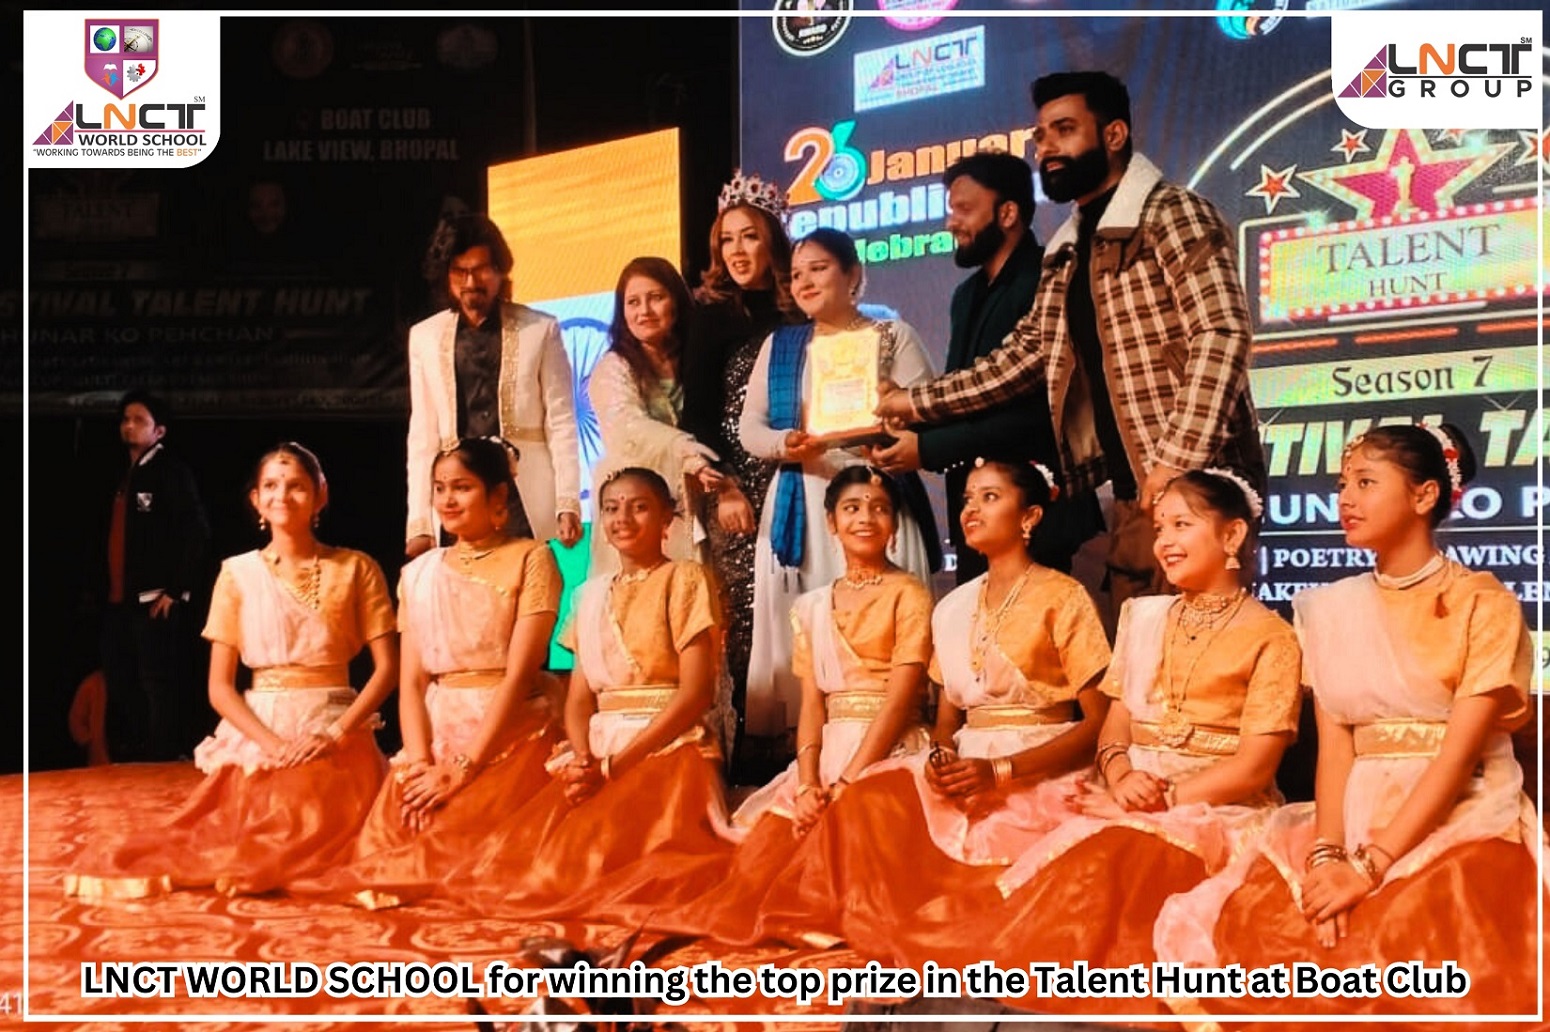 Great news! Congratulations to LNCT WORLD SCHOOL for winning the top prize in the Talent Hunt at Boat Club